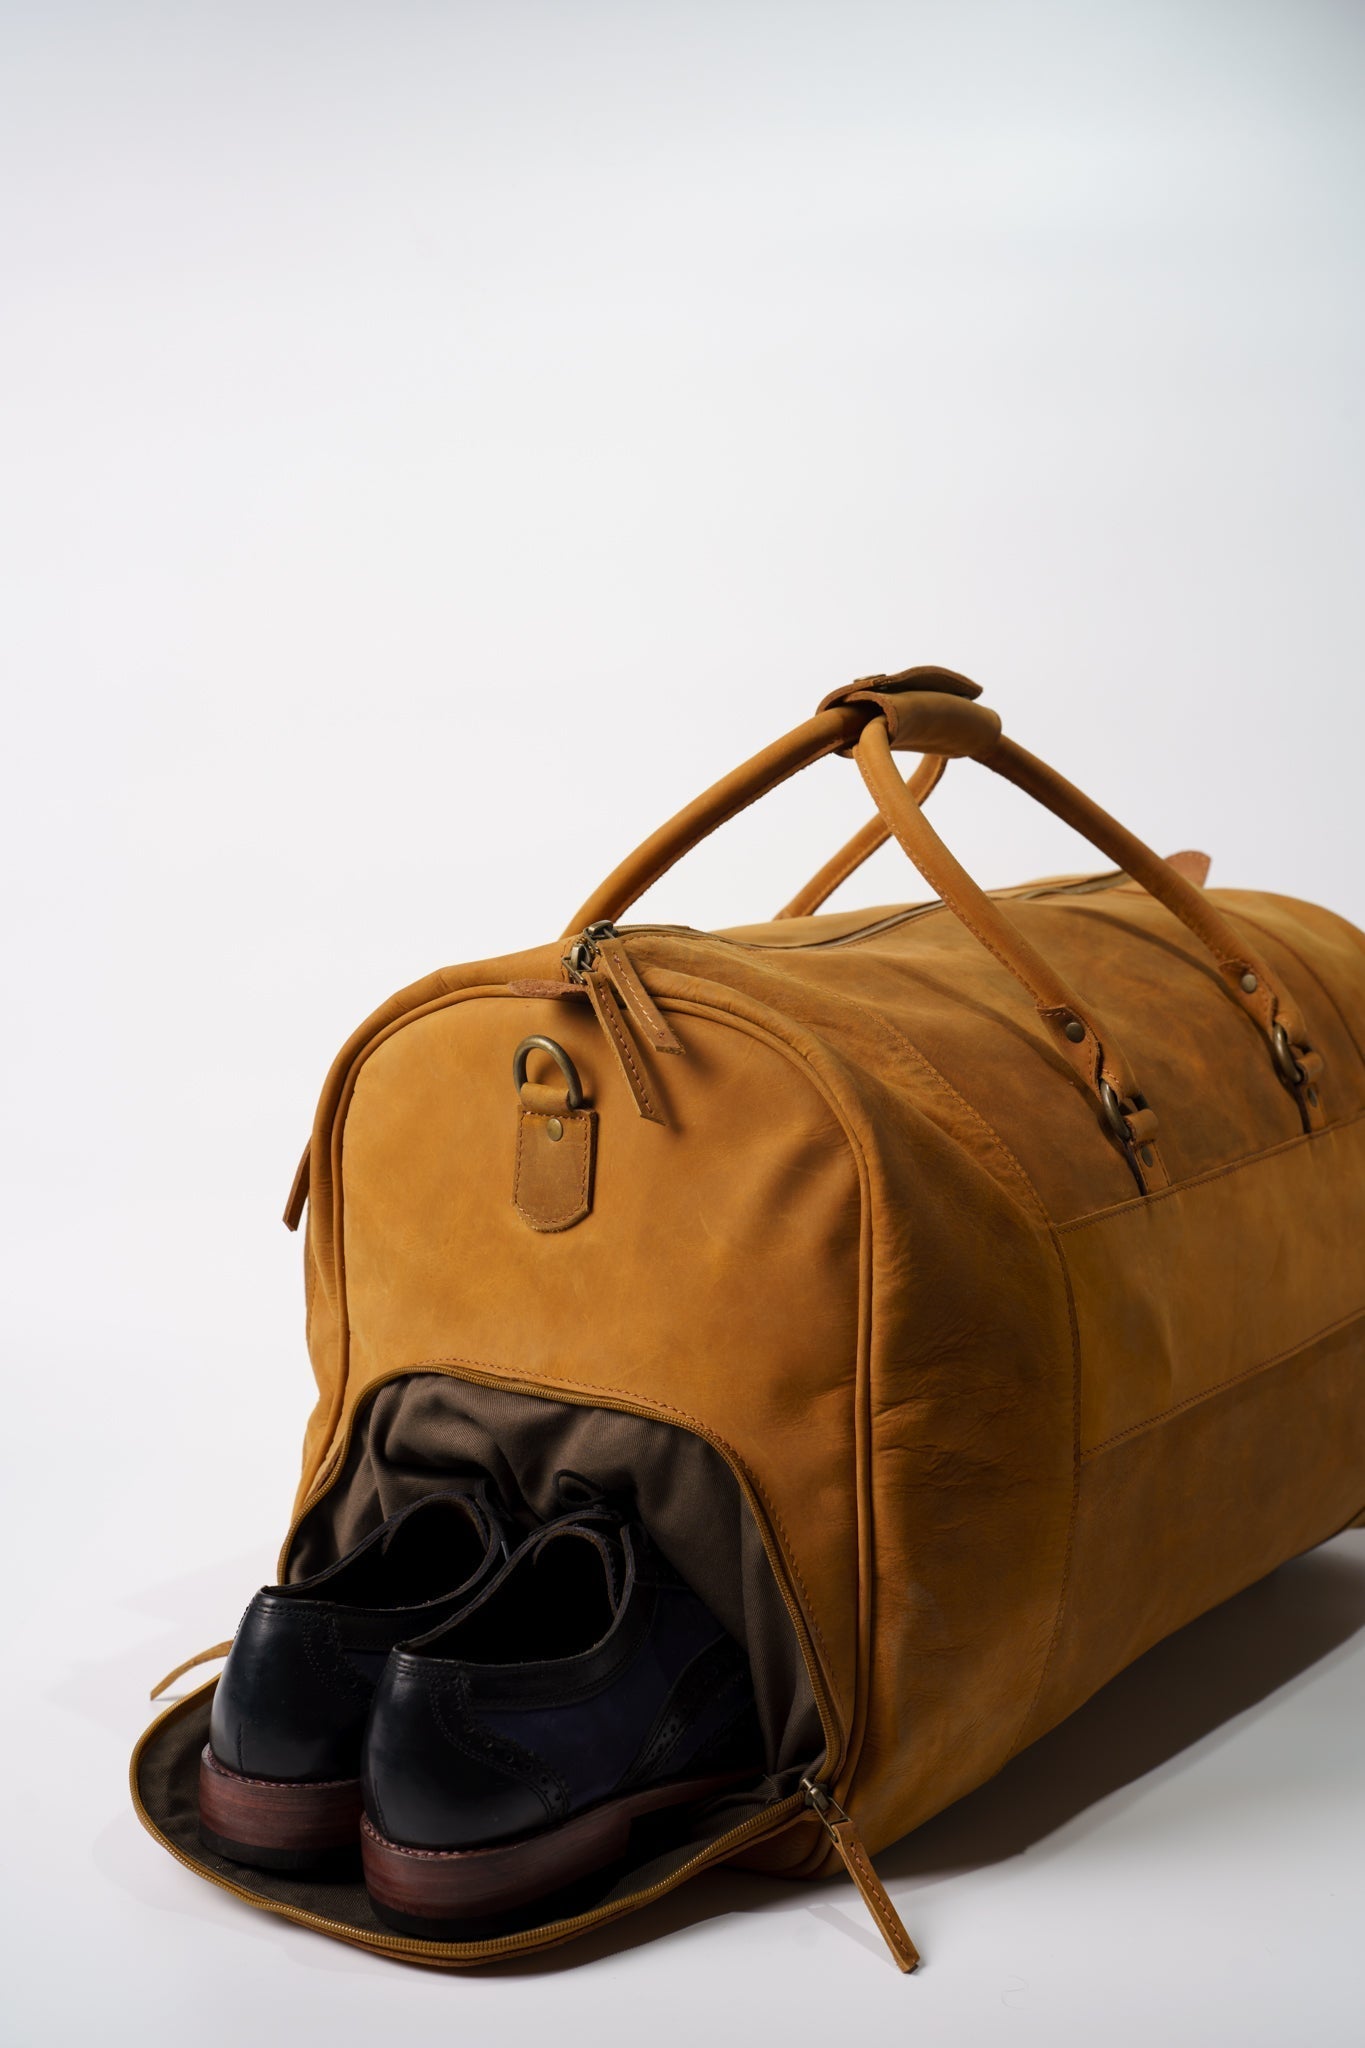 Side view of Chamra's Matte Leather Duffel bag with shoe compartment. This shot showcases the compartment for the shoes on the side of the bag. A pair of black oxford shoes can be seen popping out of the designated shoe compartment.